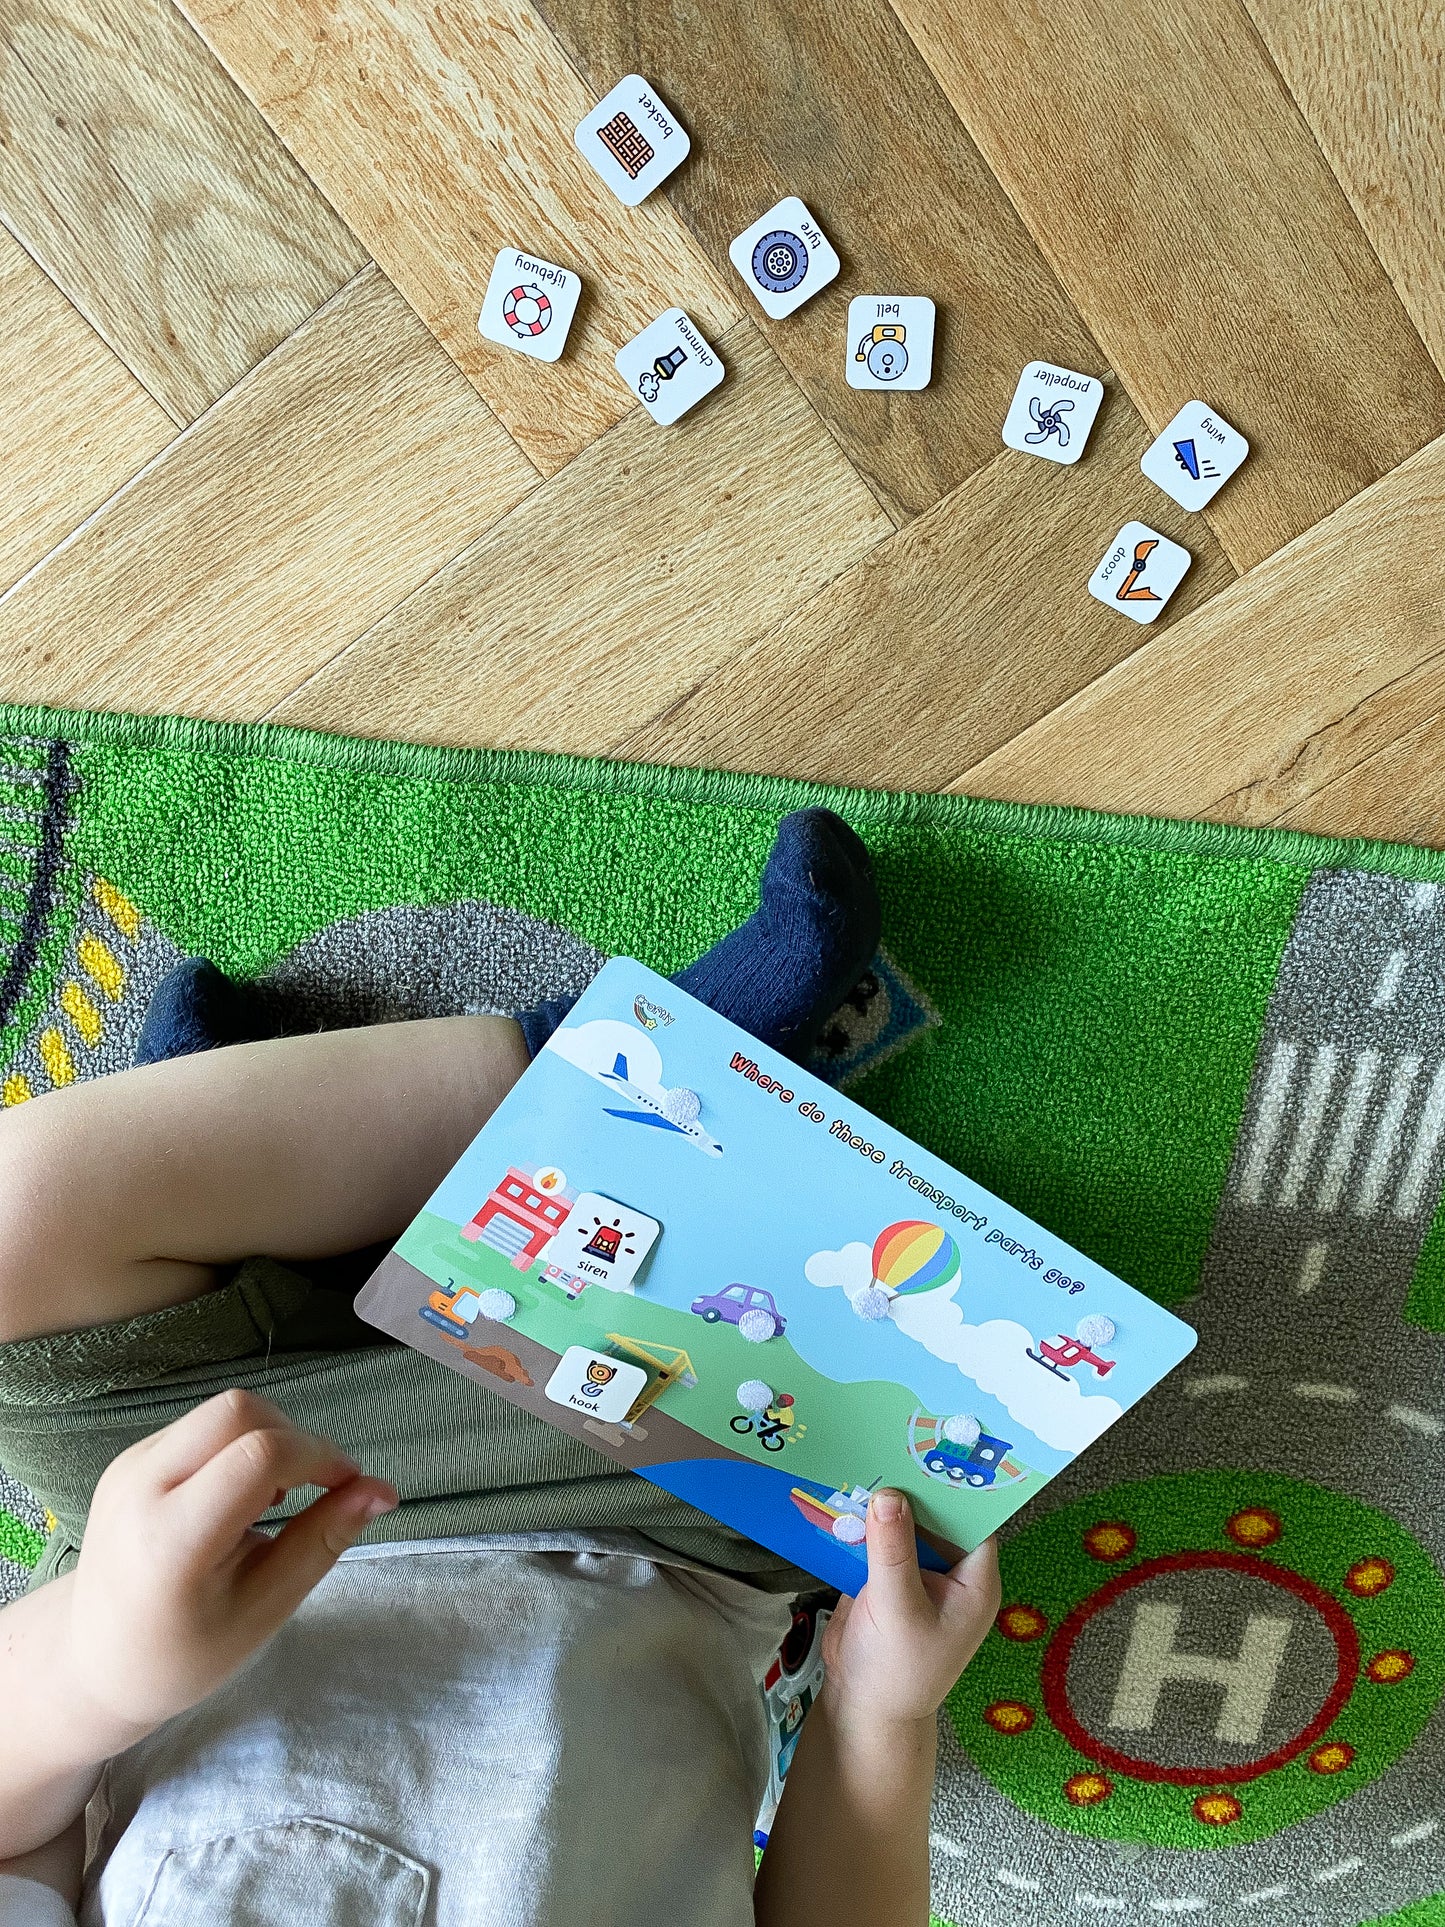 Where do these transport parts go? Matching Activity Mat